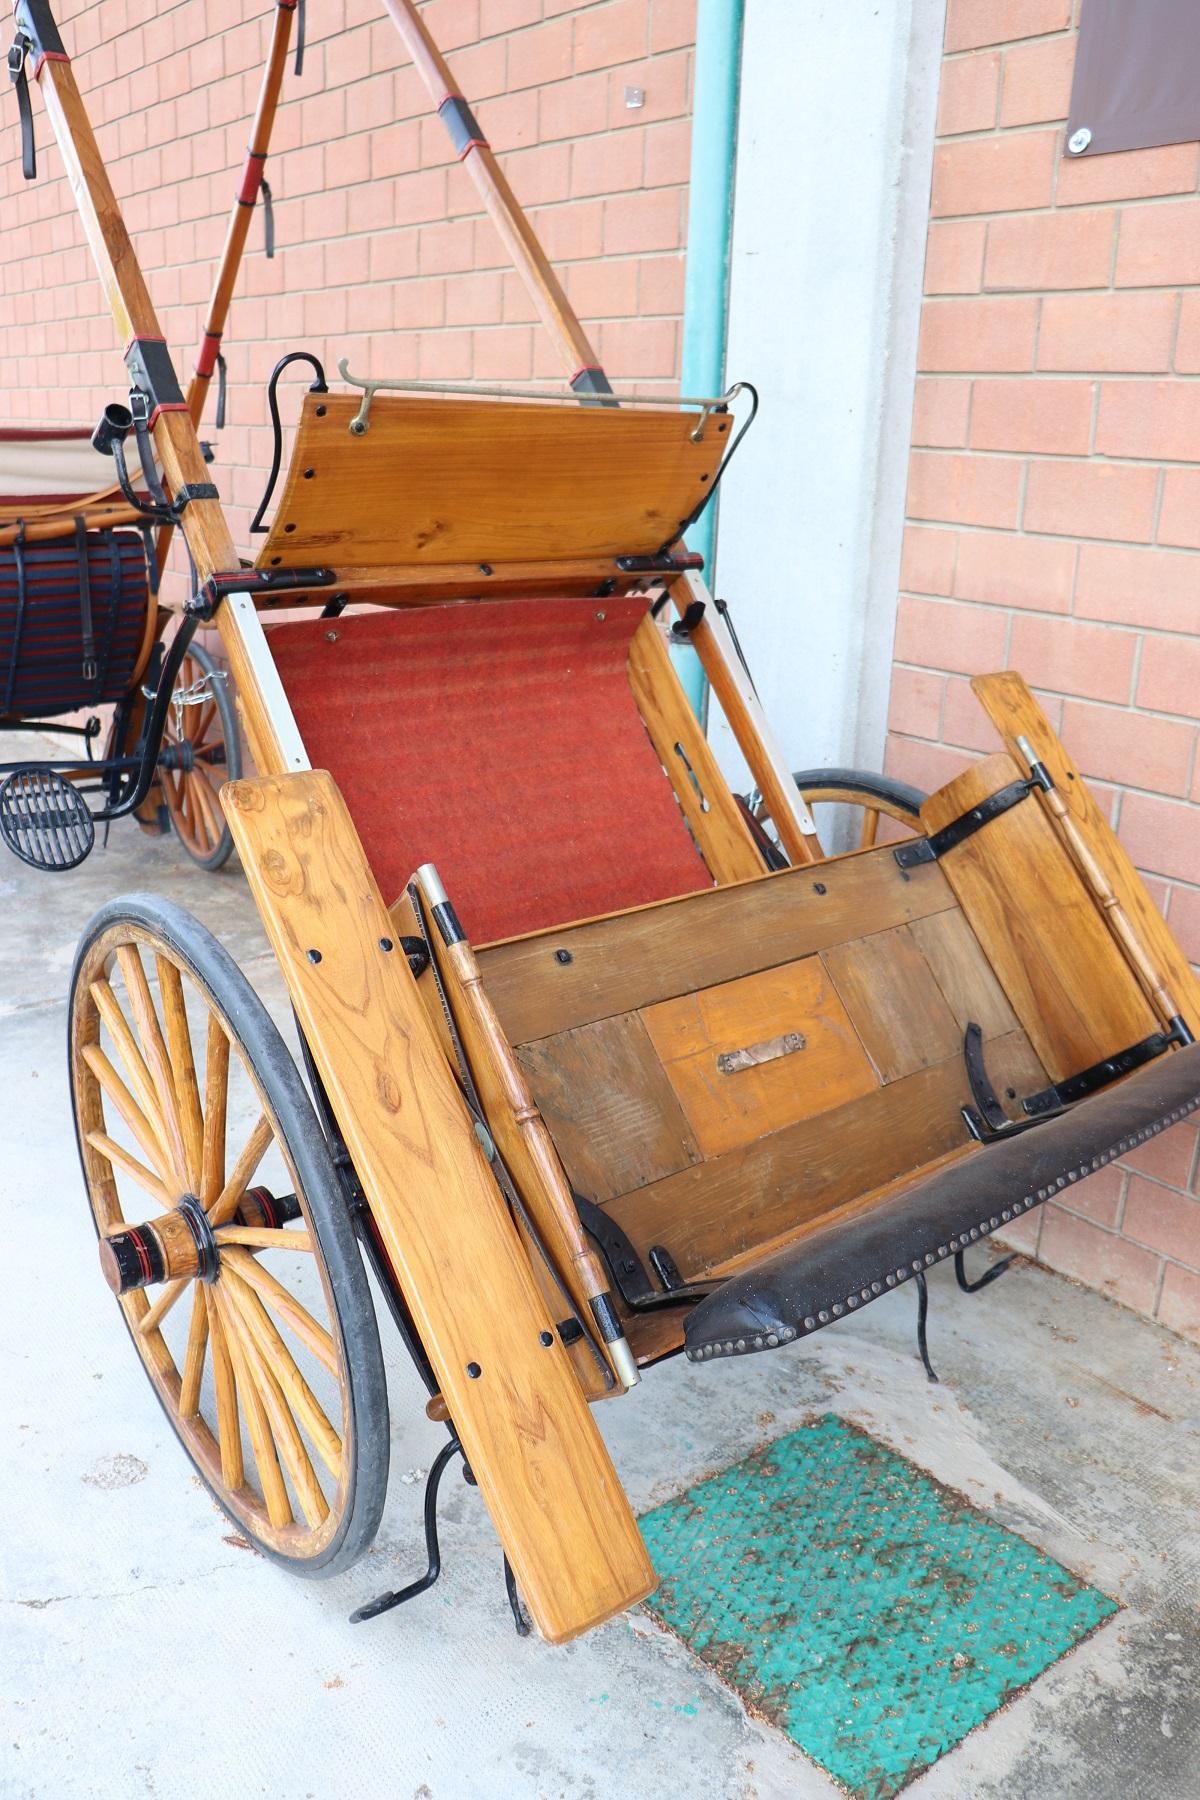 Rare early 20th century Italian pair of horse drawn carriage buggy carriage wagon. Made of solid chestnut wood they are rare and fascinating items from the past. They can be used or simply displayed as a garden ornament. A seat cushion is missing.